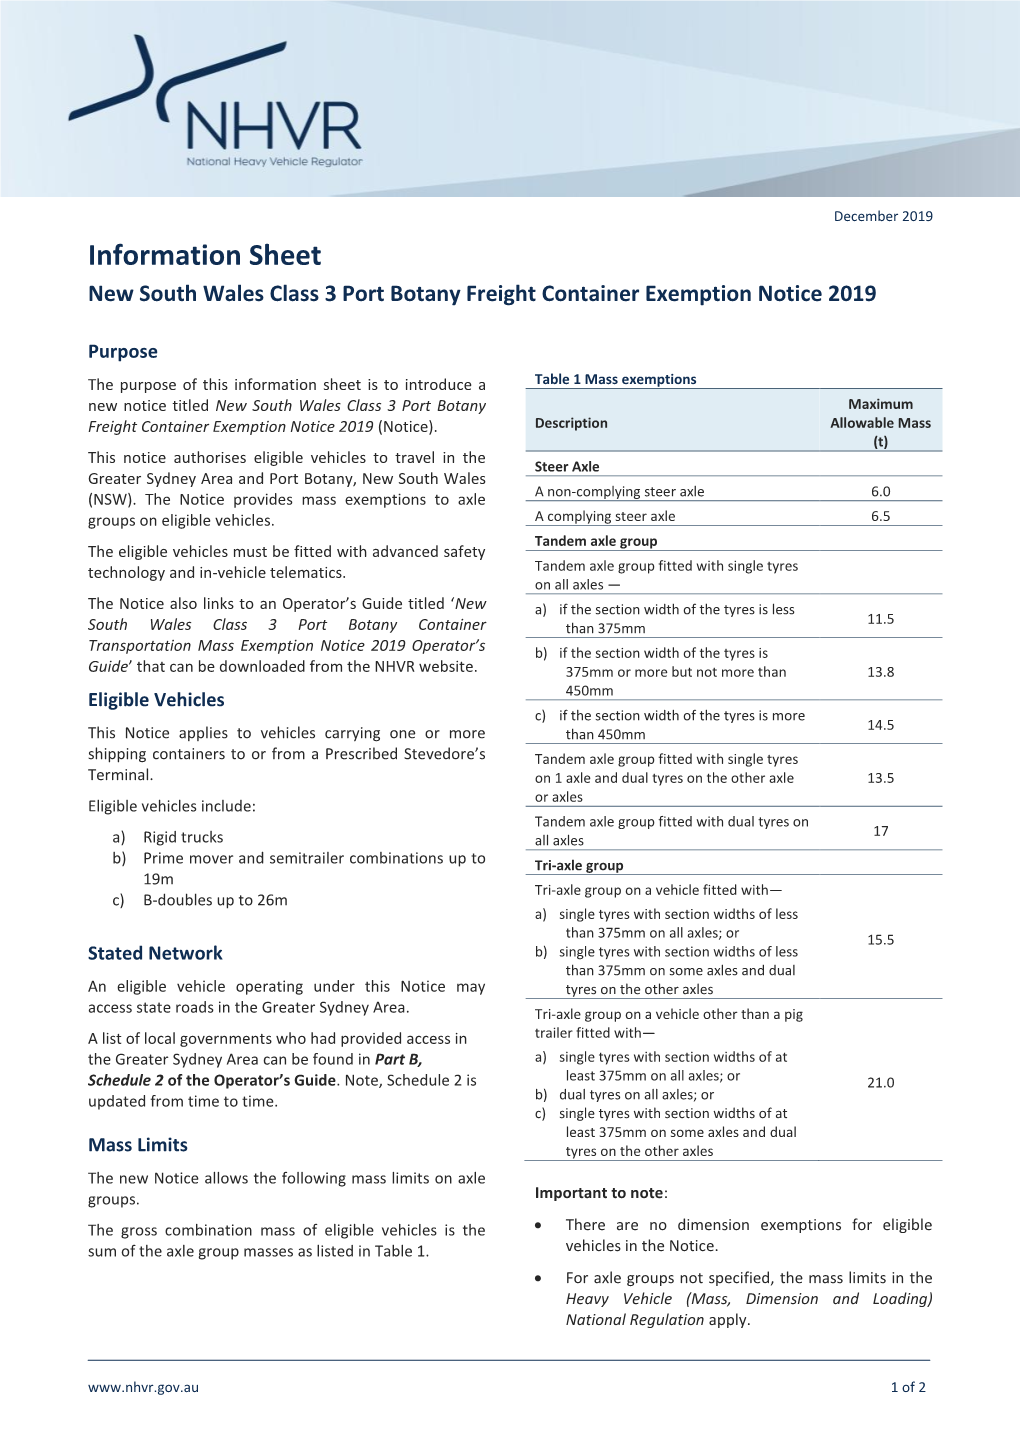 New South Wales Class 3 Port Botany Freight Container Exemption Notice 2019